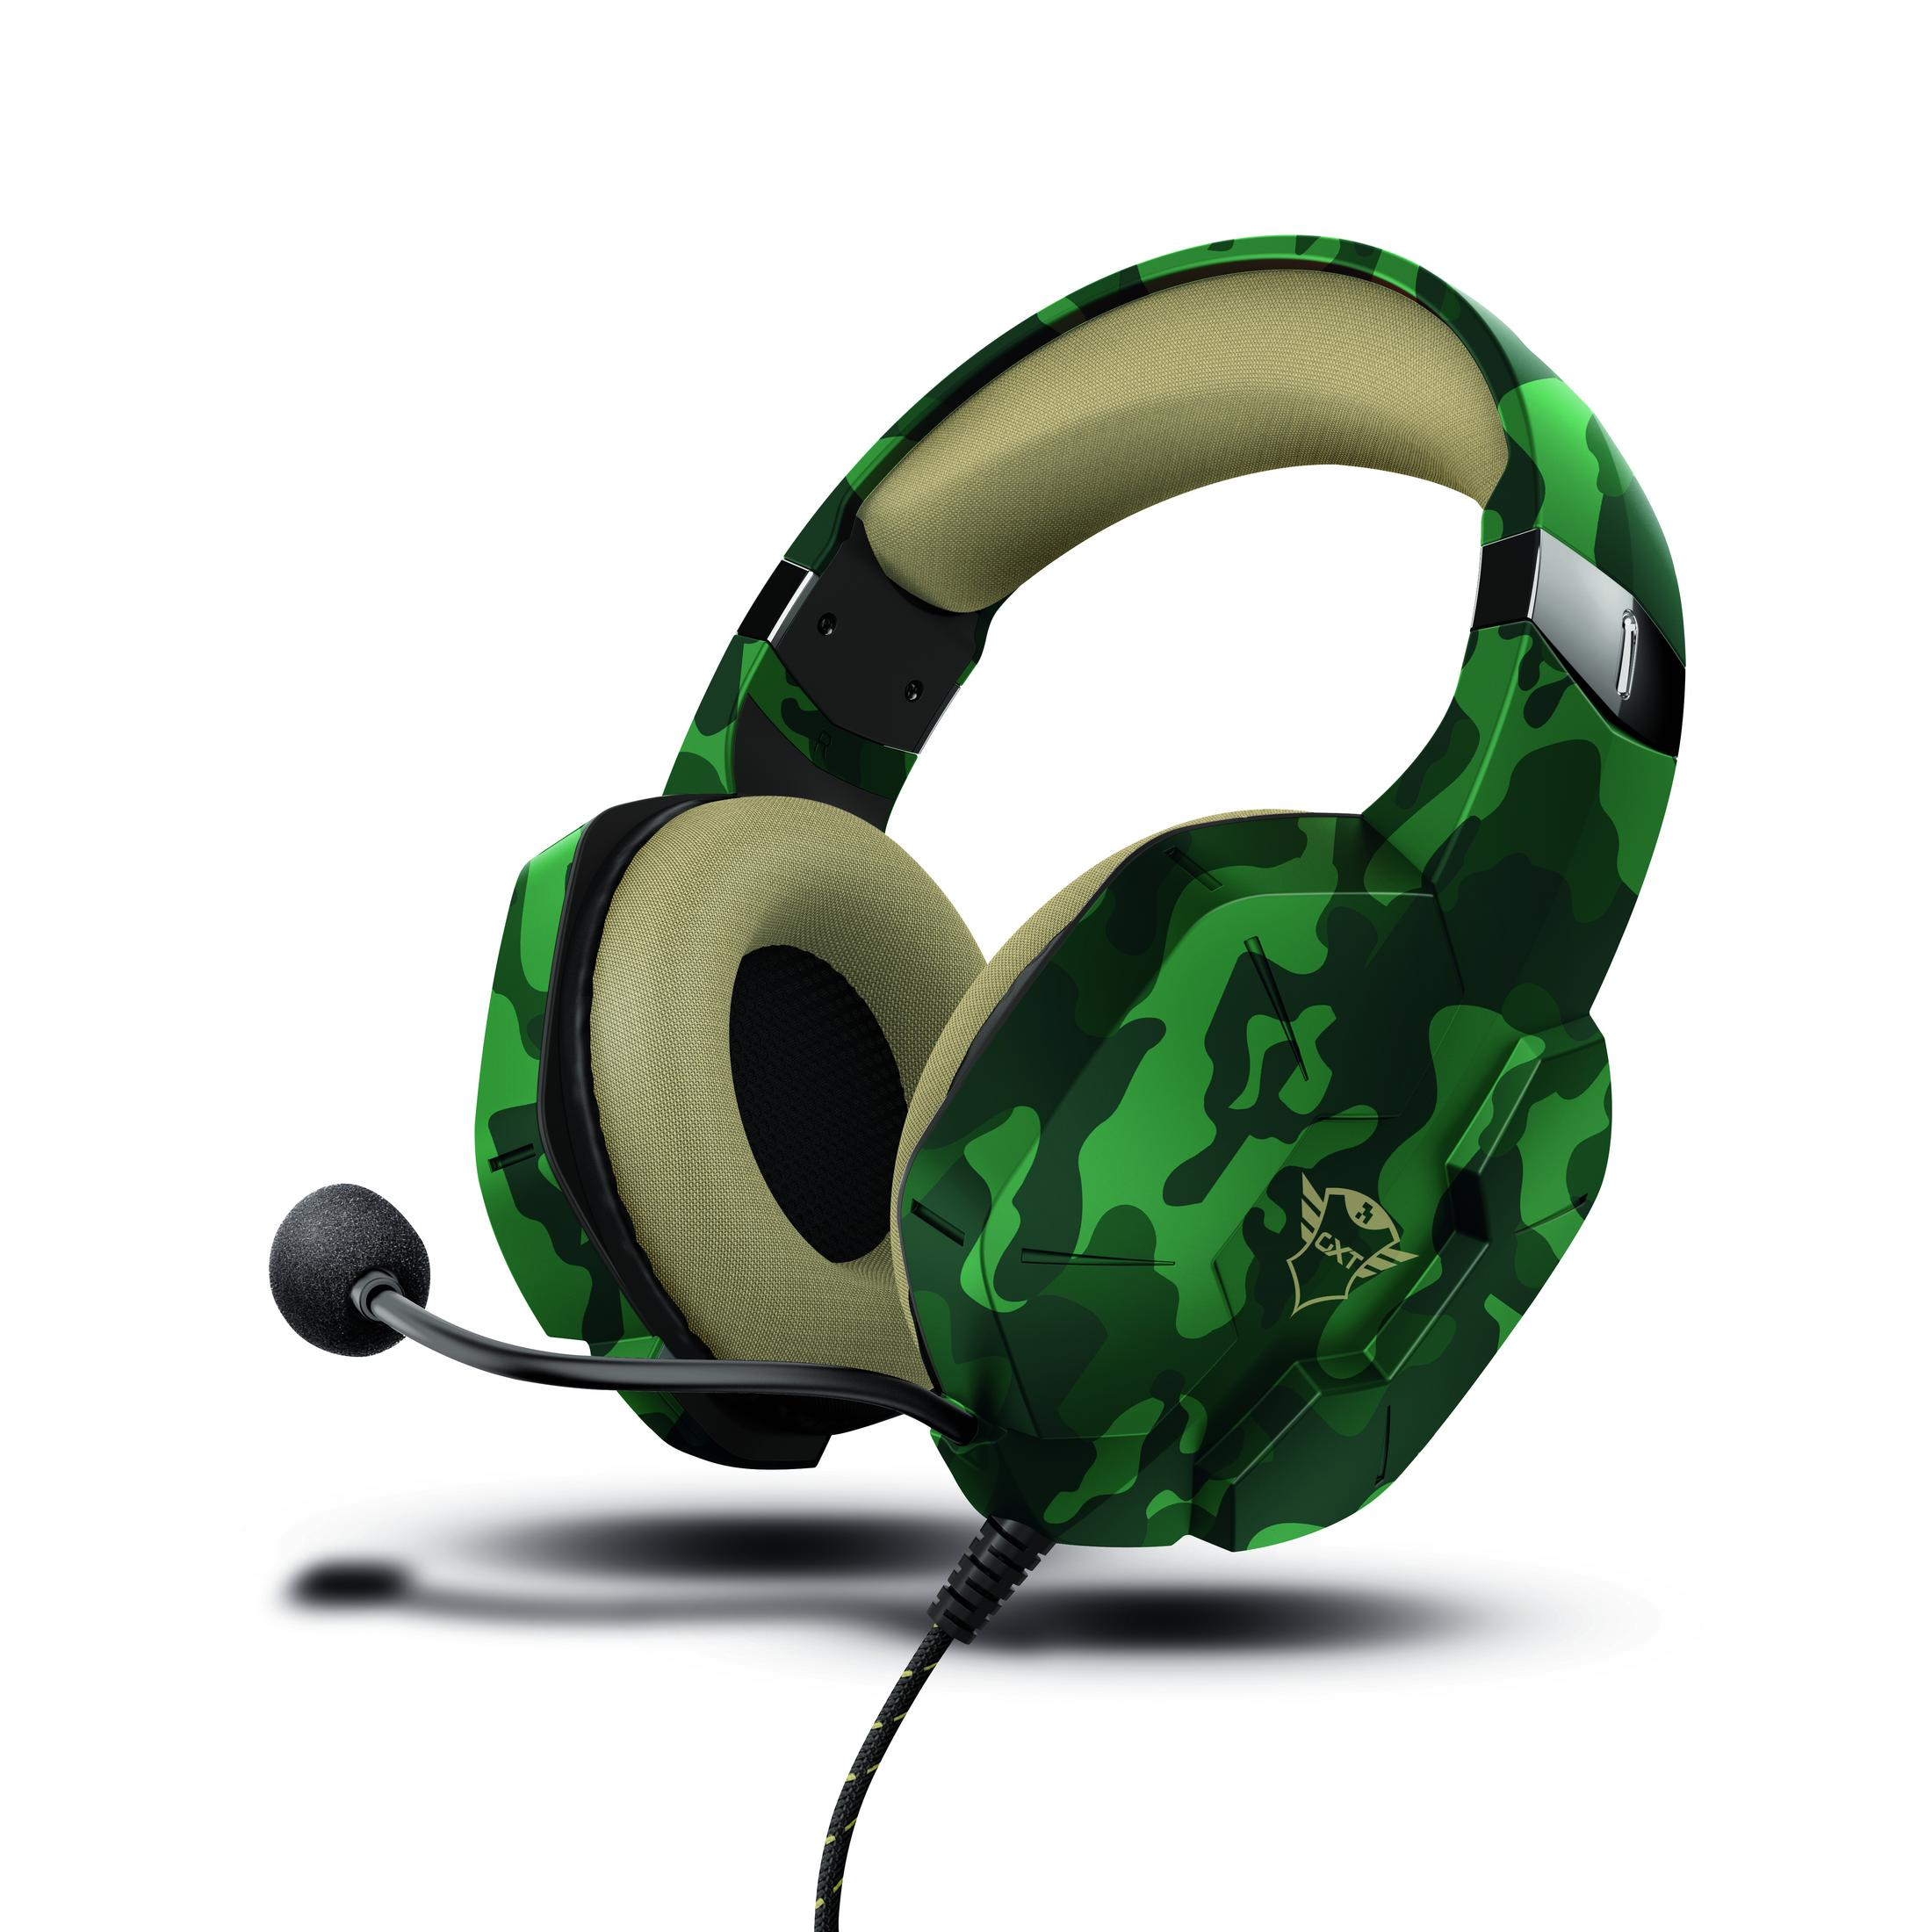 TRUST 24319 CARUS In-ear Headset Camouflage CAMO, GXT323C GAMING Grün JUNGLE Gaming